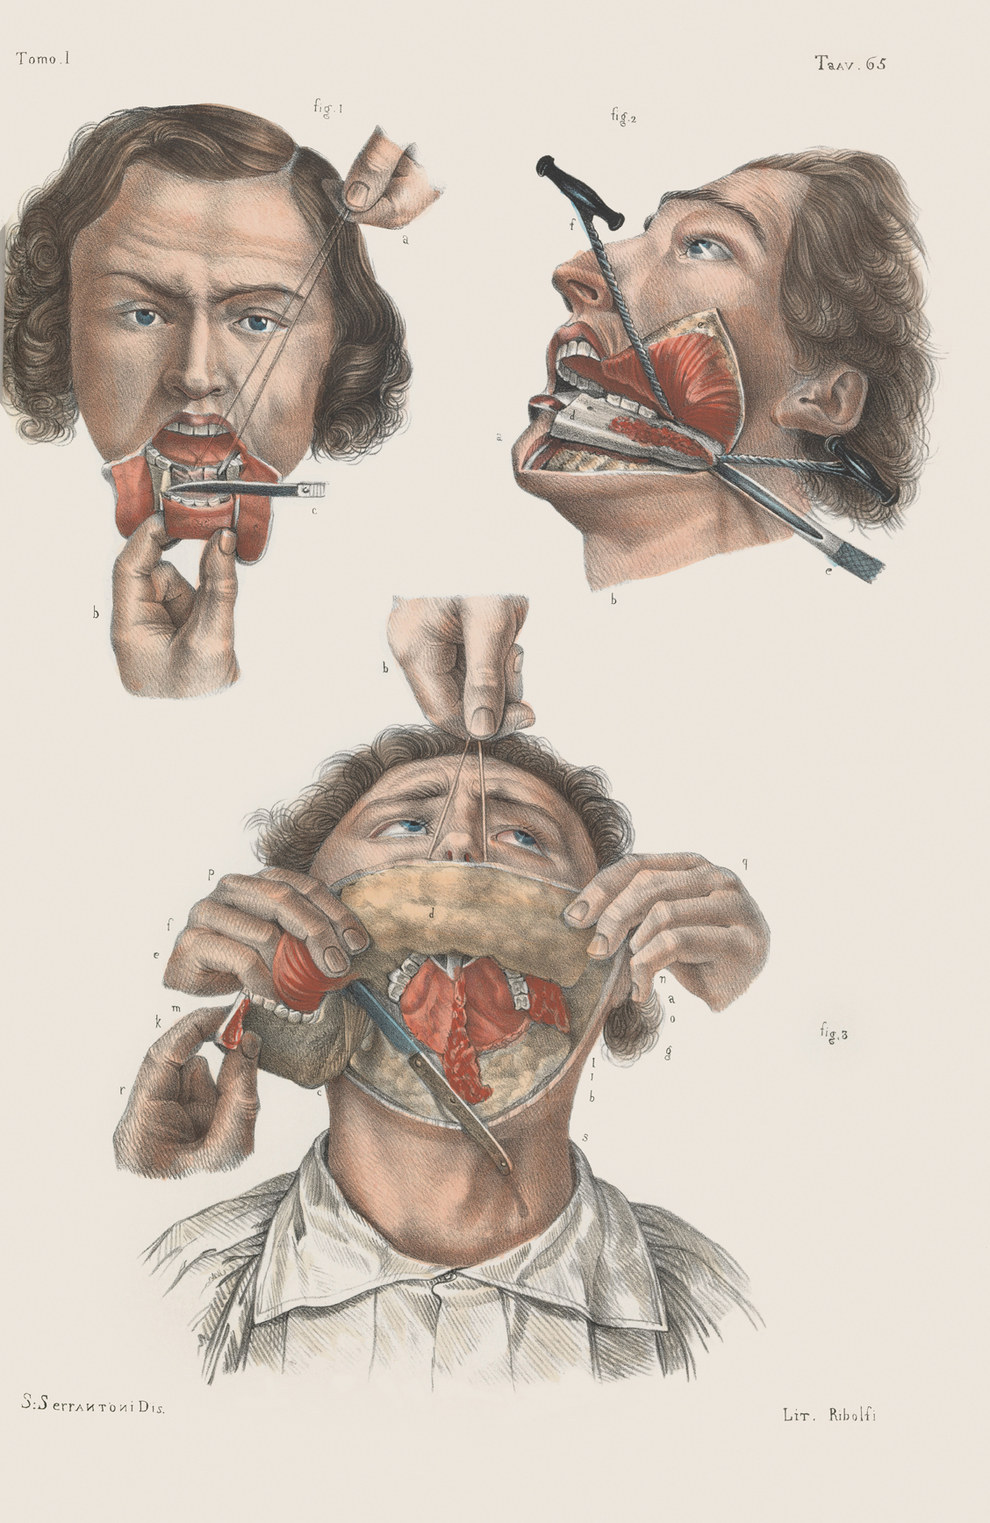 Removal (or "resection") of the lower jaw.